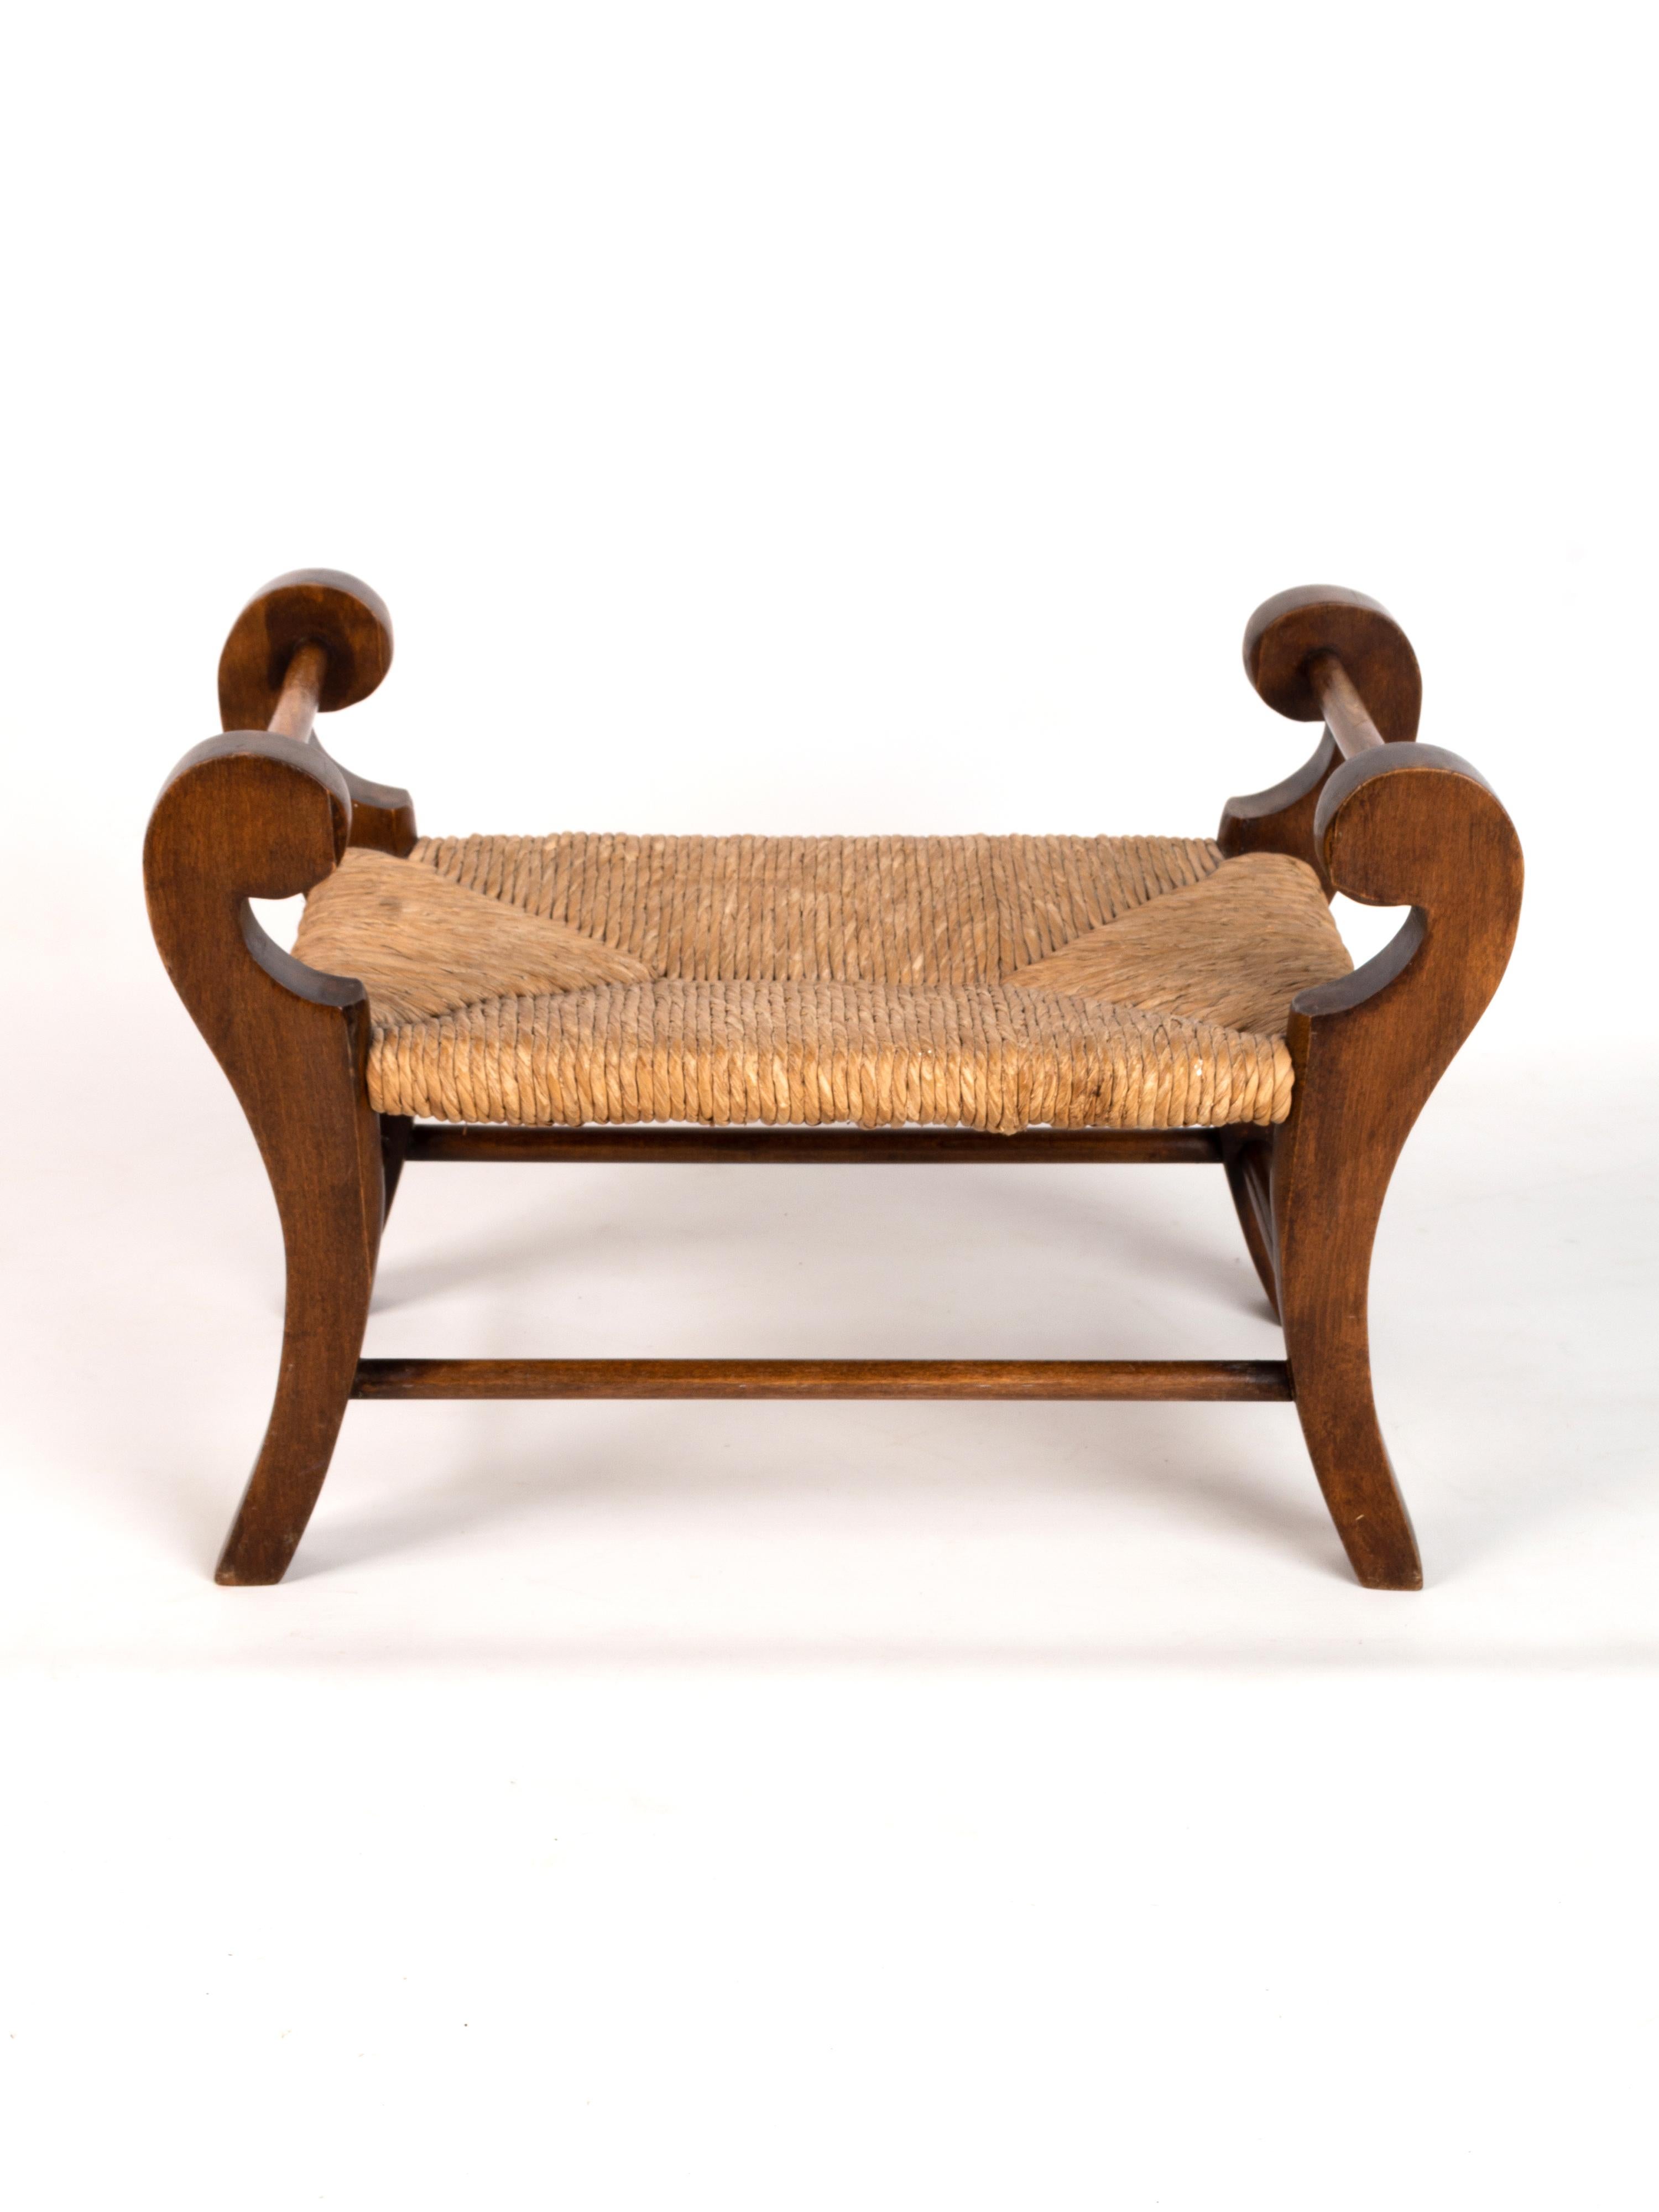 Woven Antique English Rush And Beech Footstool Stool C.1930 For Sale